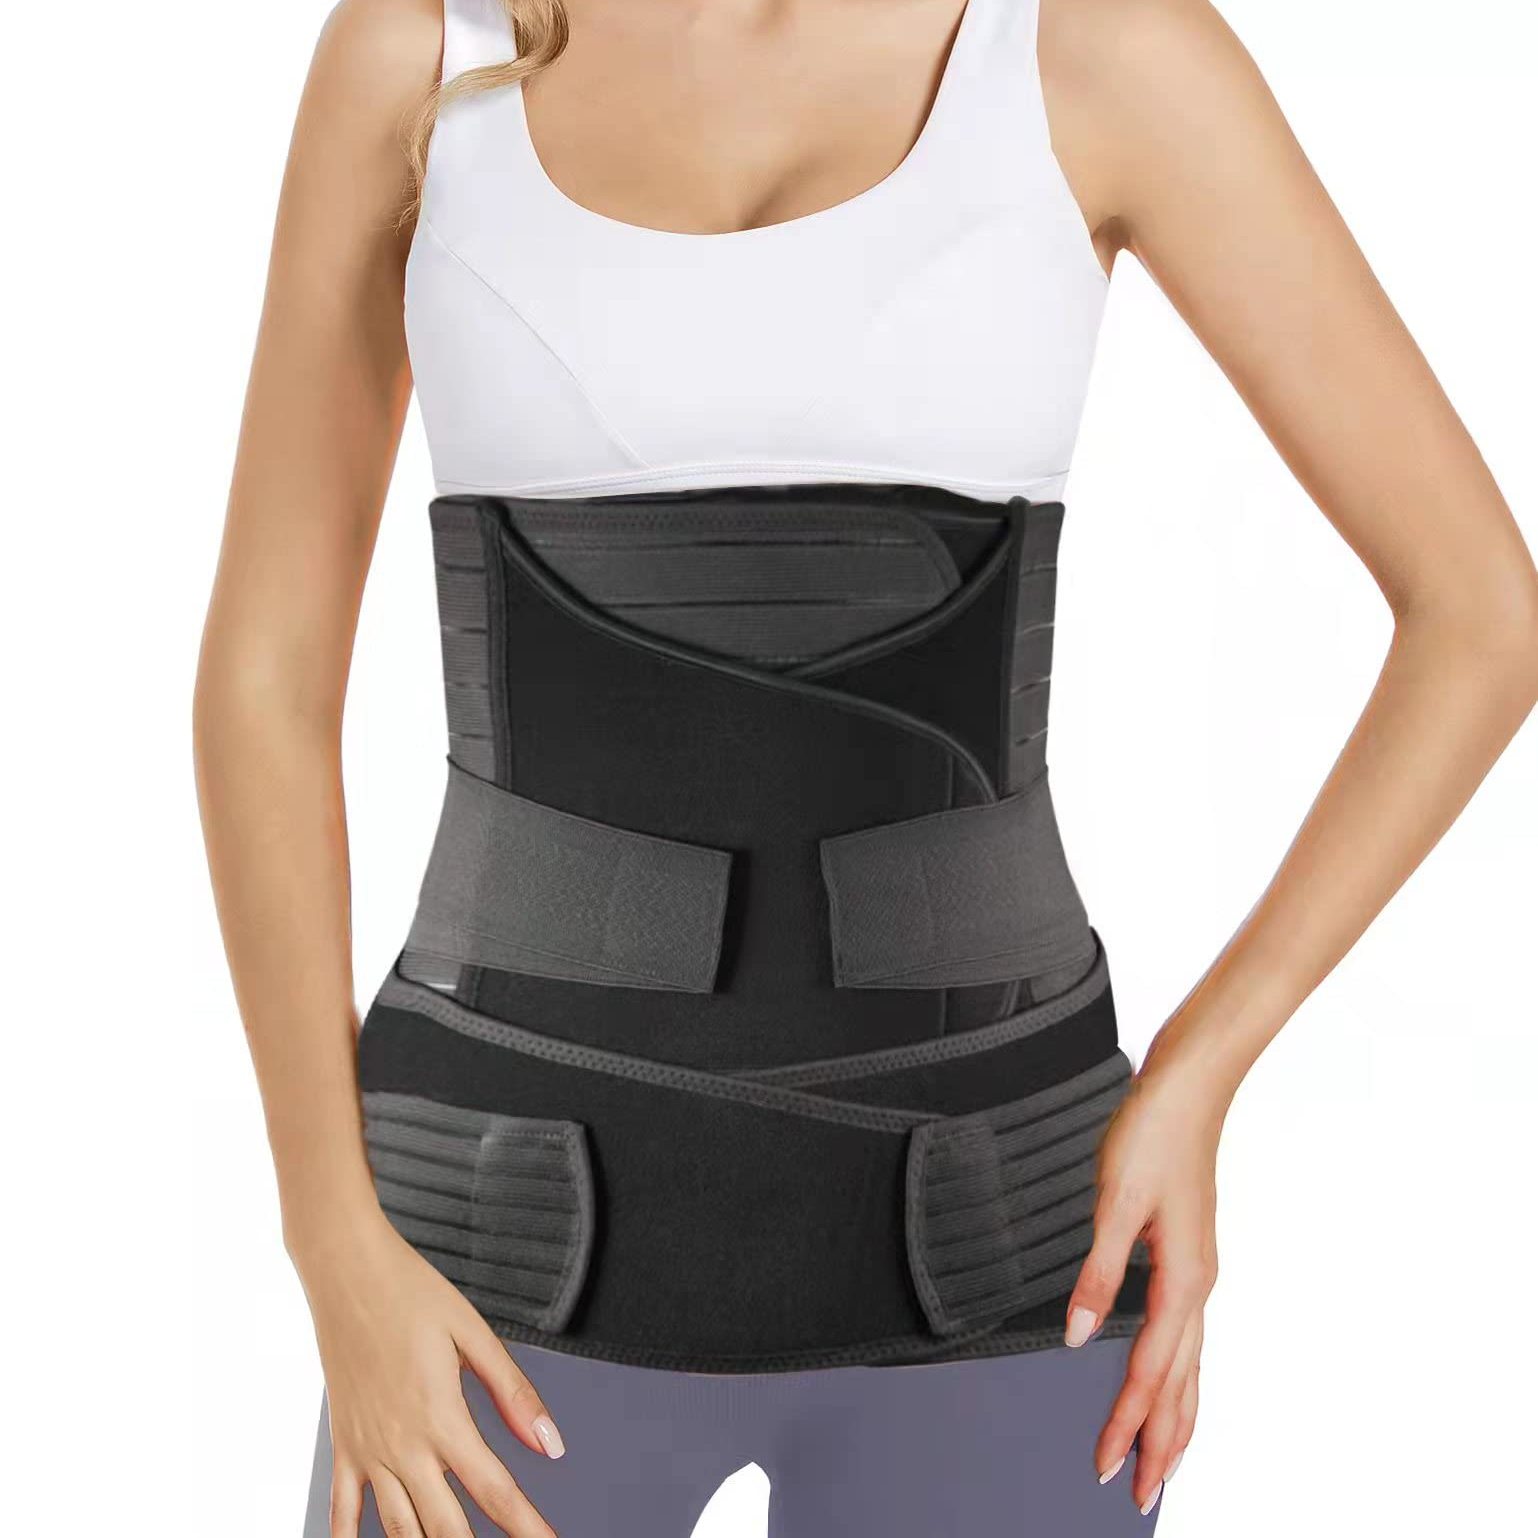 Postpartum Waist Trainer With Back Support And Belly Band